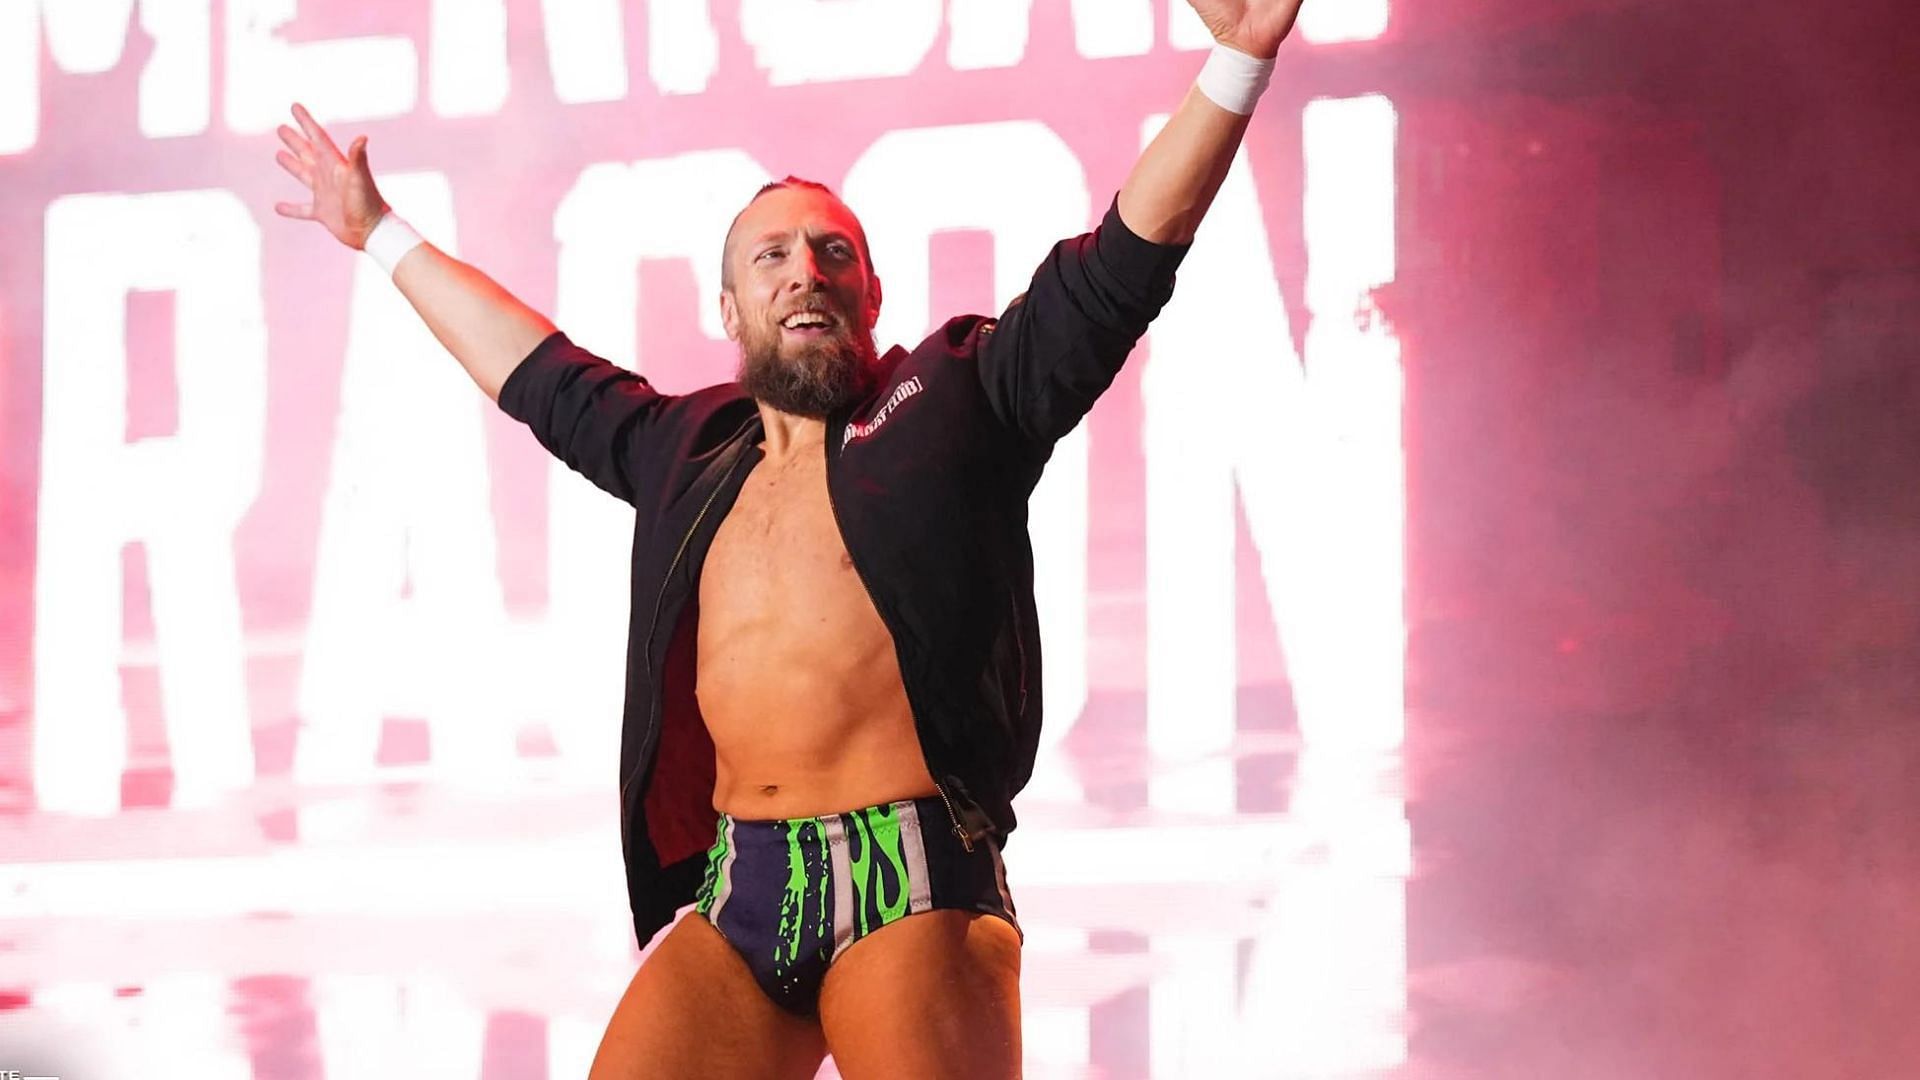 Bryan Danielson recently defeated Swerve Strickland on Dynamite